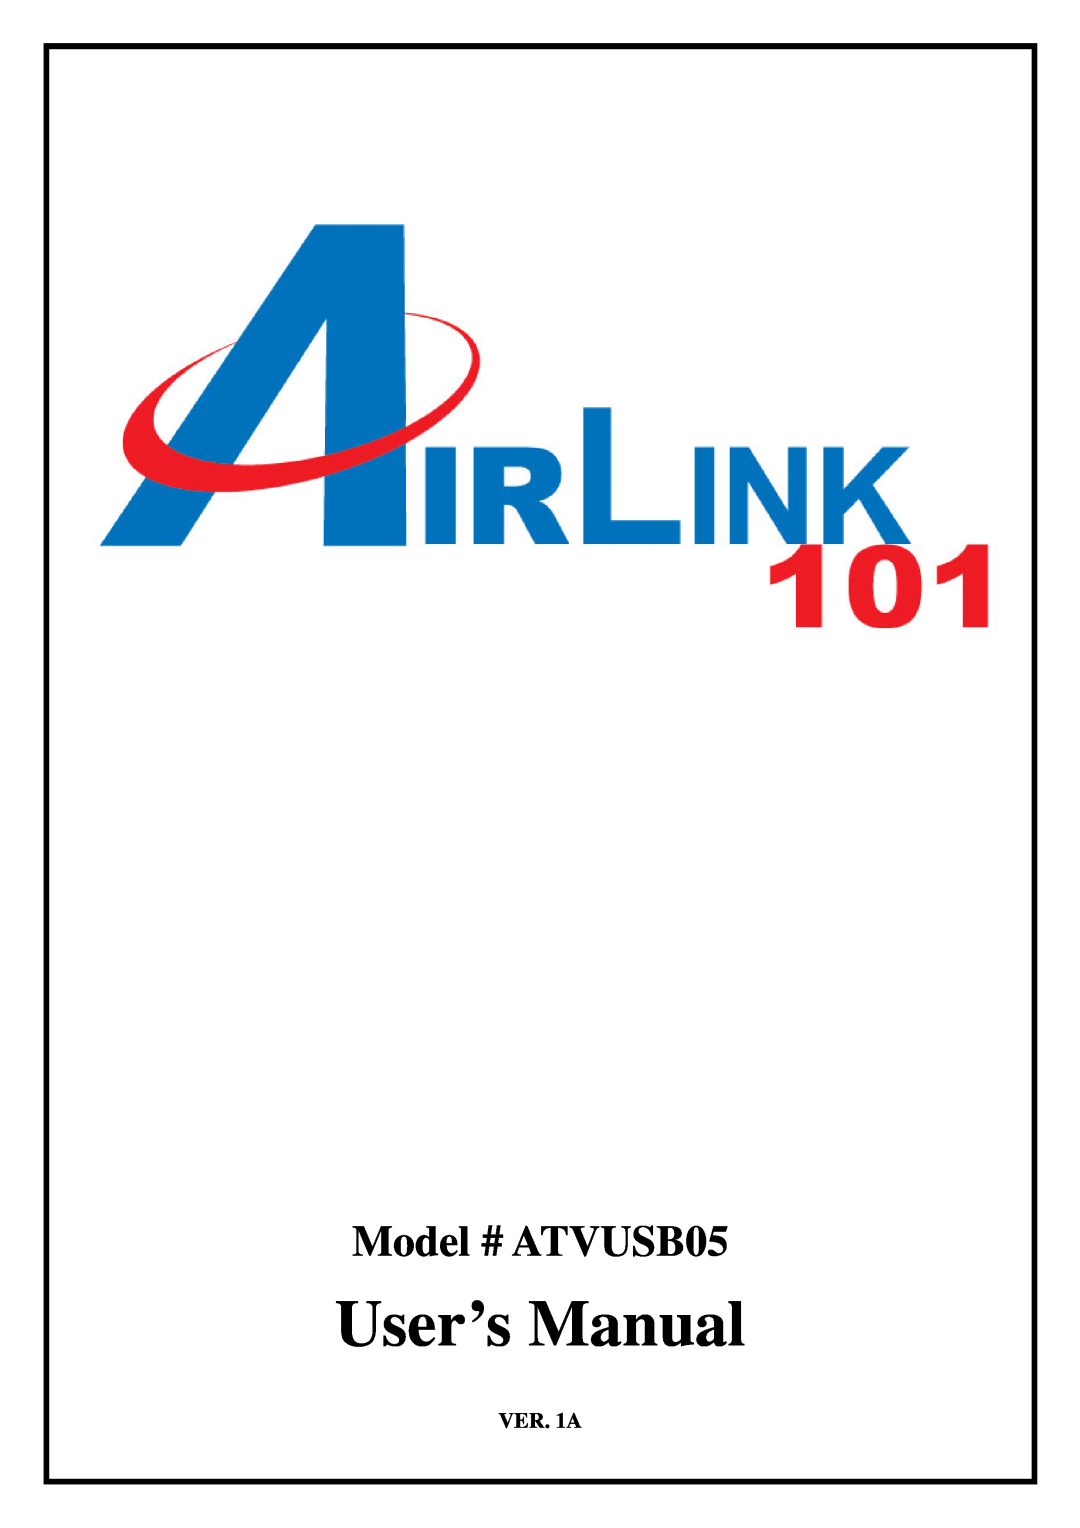 Airlink101 manual Model # ATVUSB05, VER. 1A 